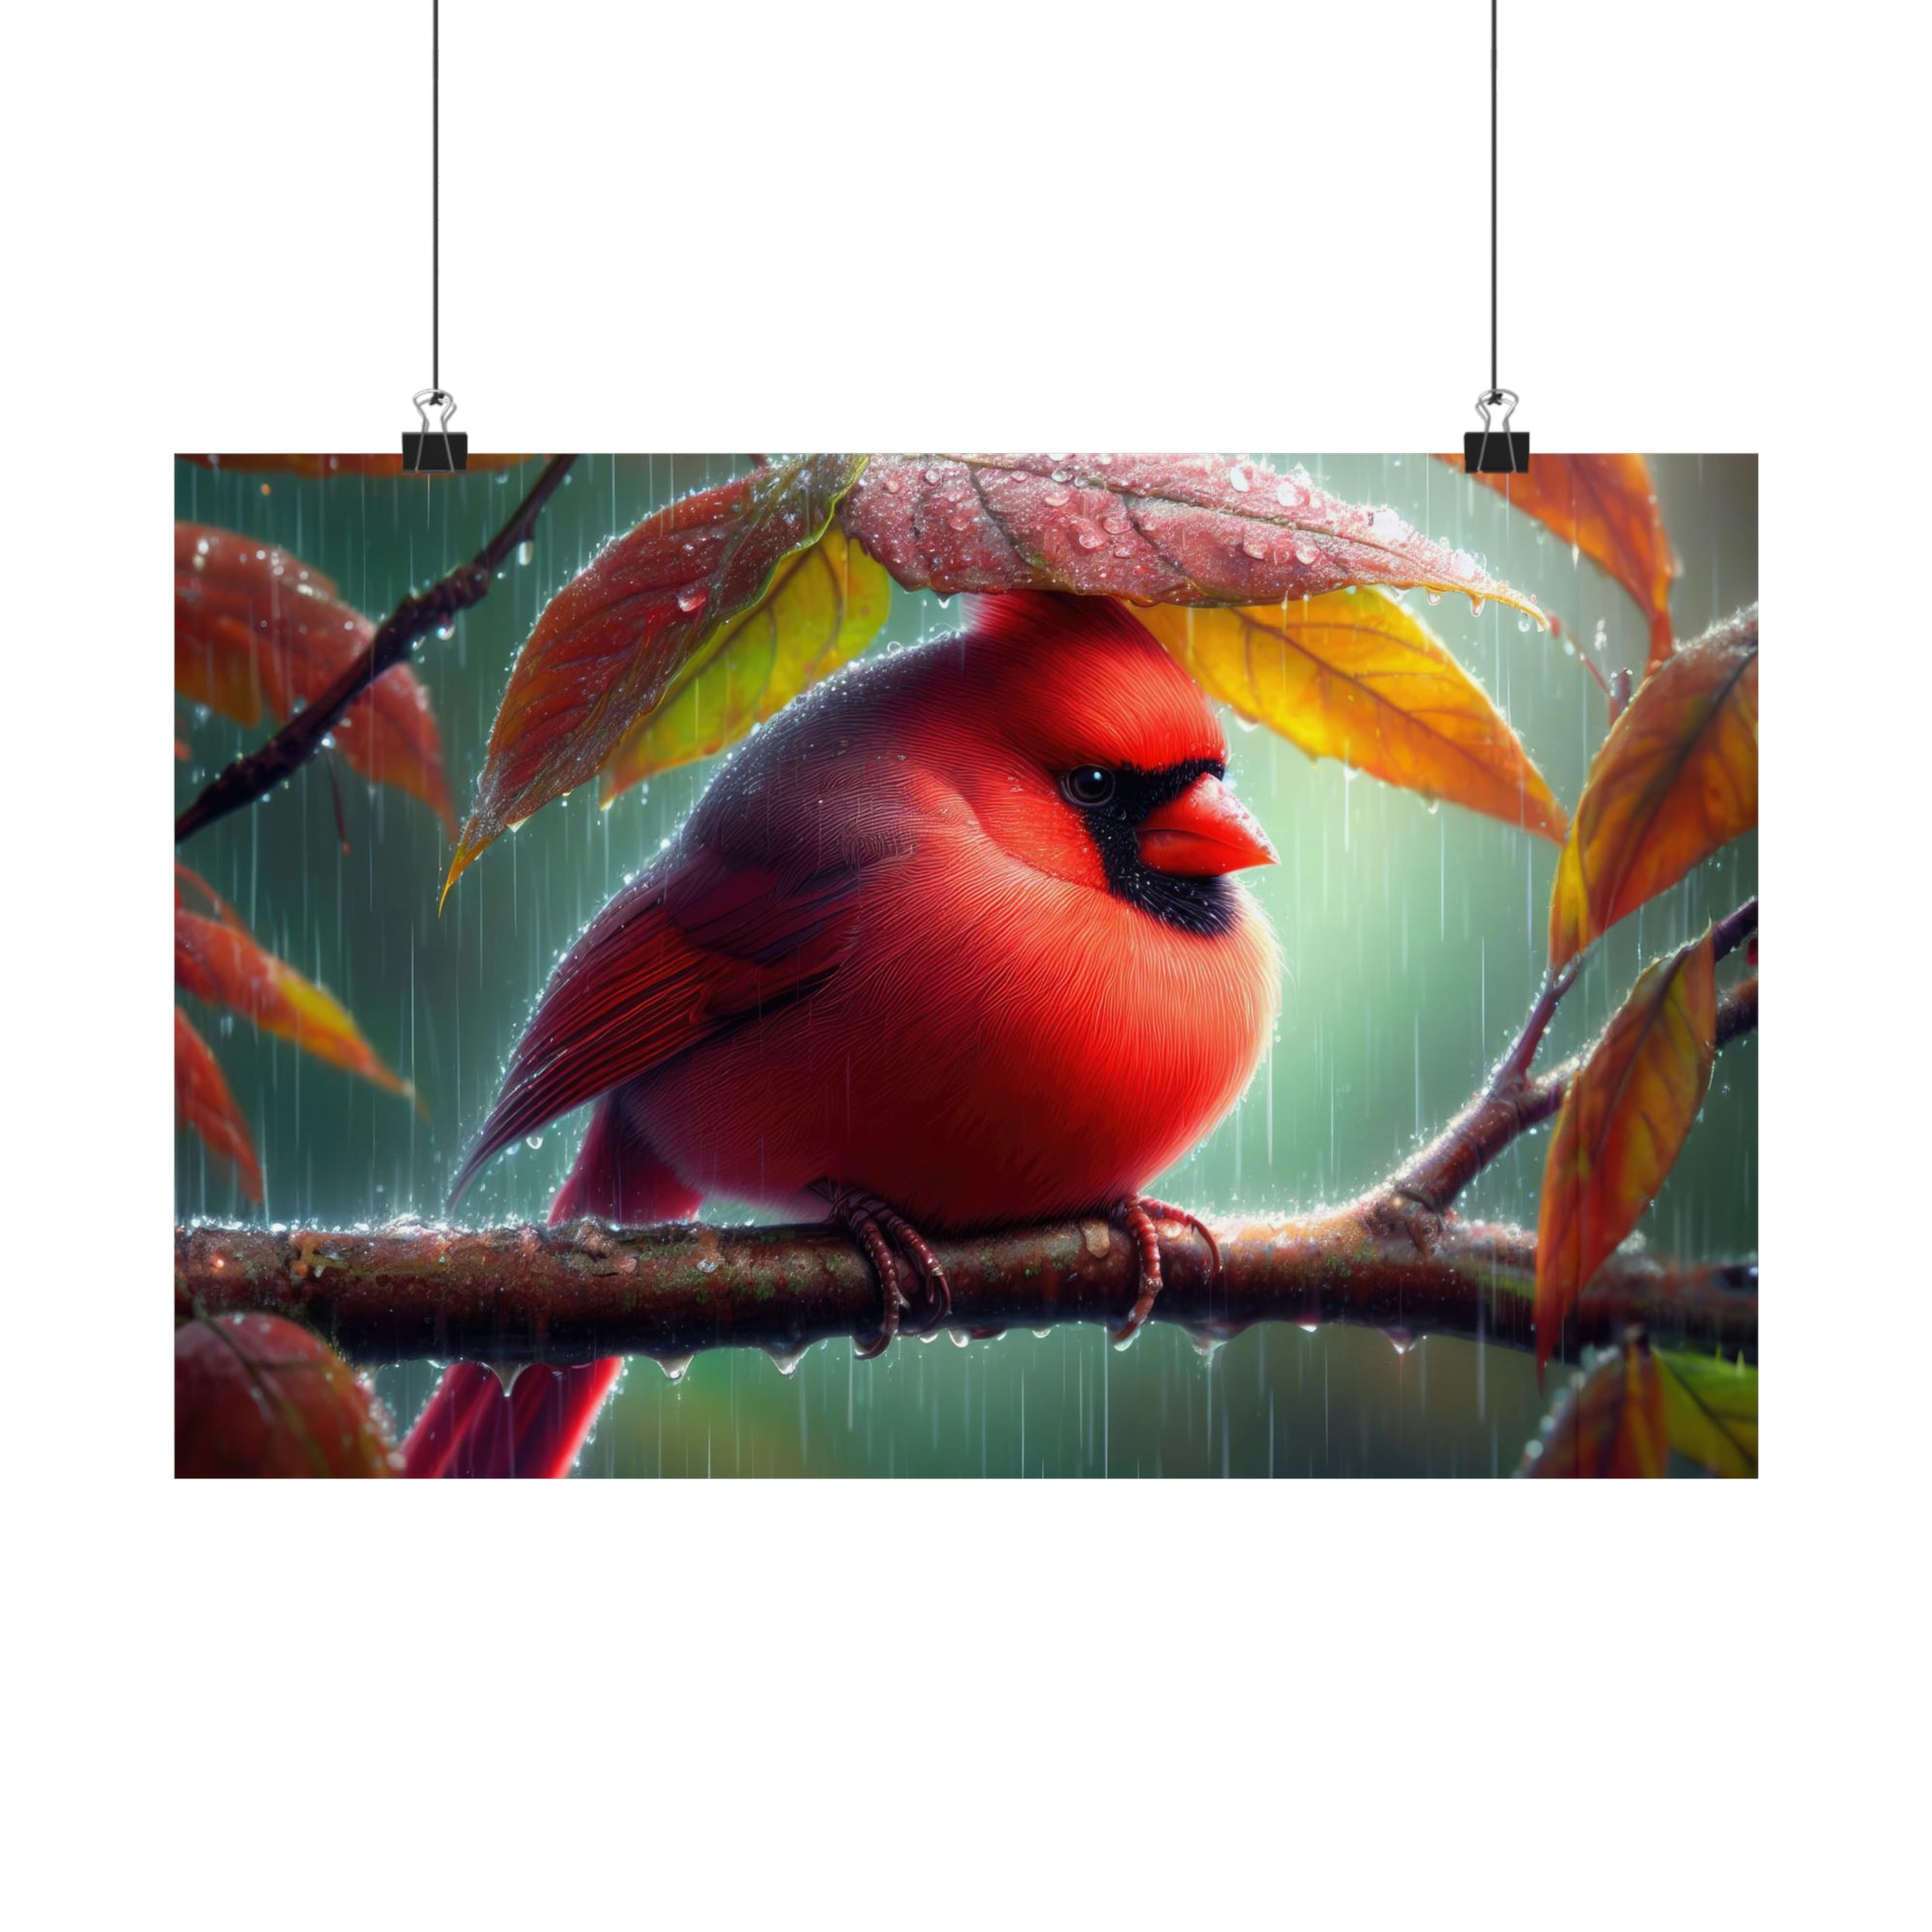 Drenched Cardinal Under a Leaf Canopy Poster